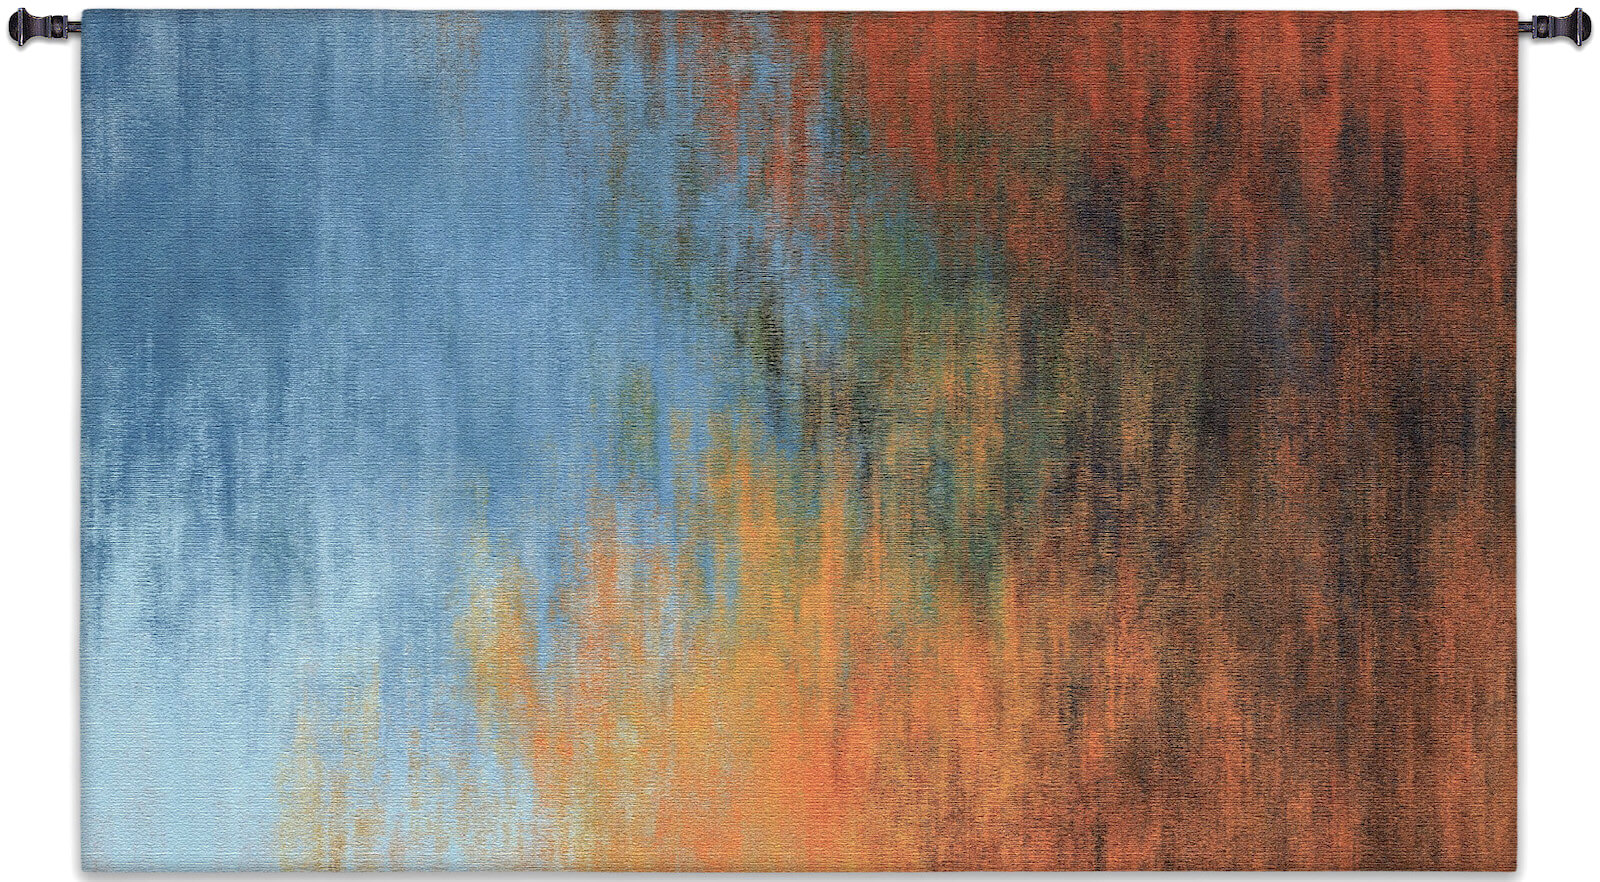 Continuum Horizontal Wall Tapestry abstract, colorful, red, blue, orange, Valiance Horizontal Wall Tapestry, Continuum